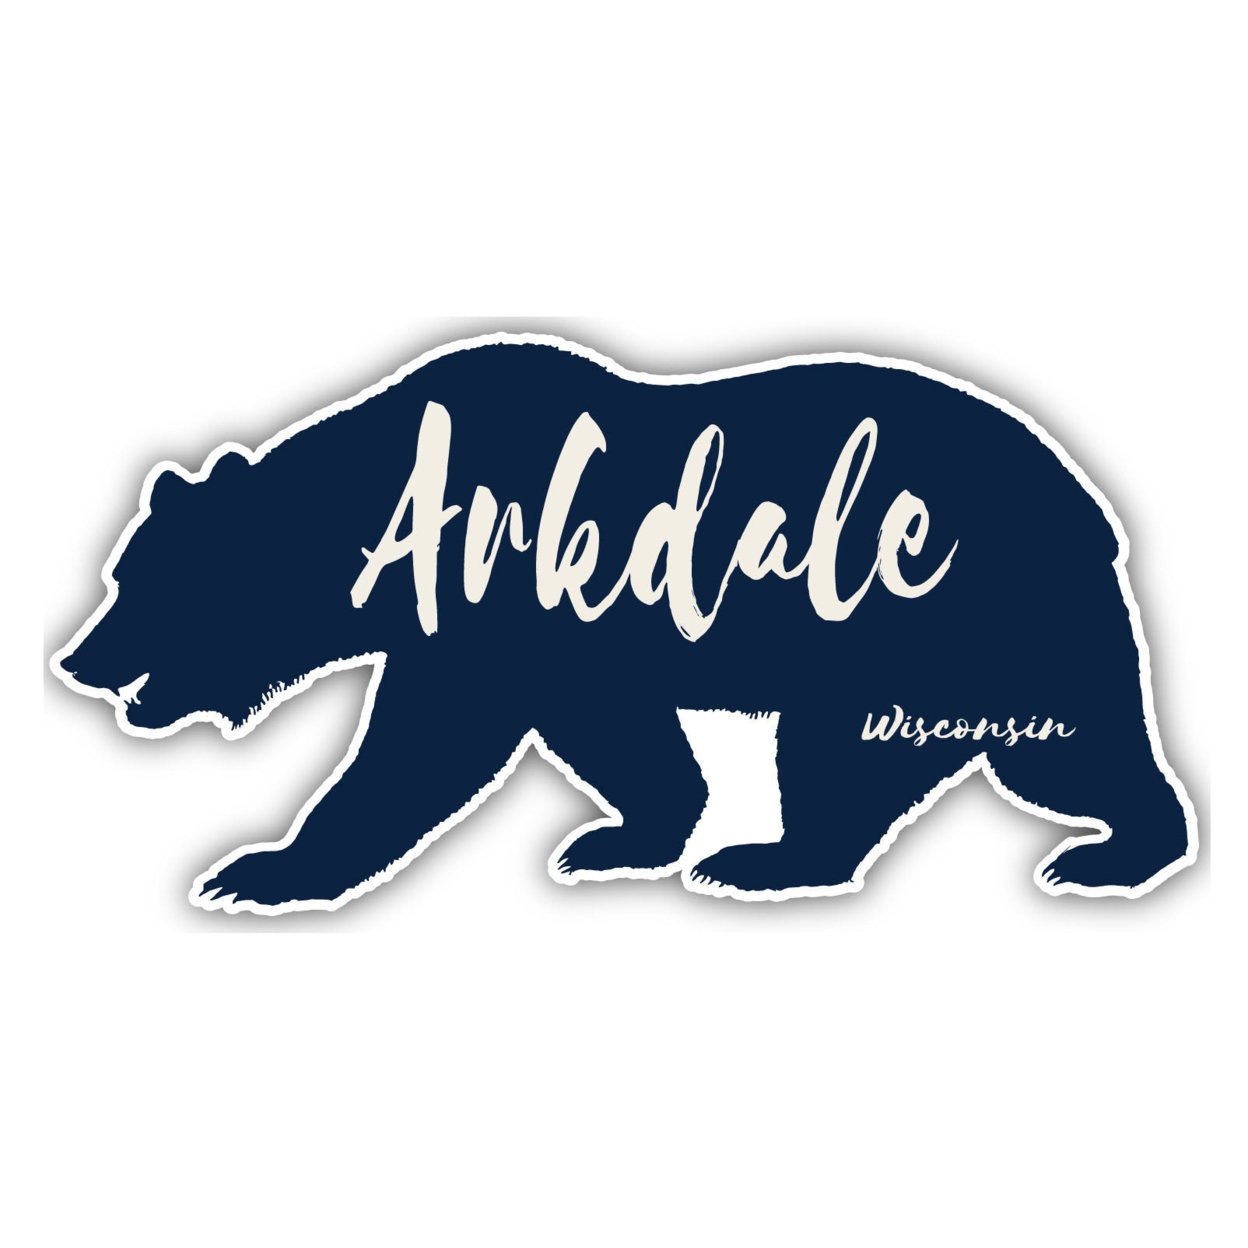 Arkdale Wisconsin Souvenir Decorative Stickers (Choose Theme And Size) - Single Unit, 2-Inch, Bear